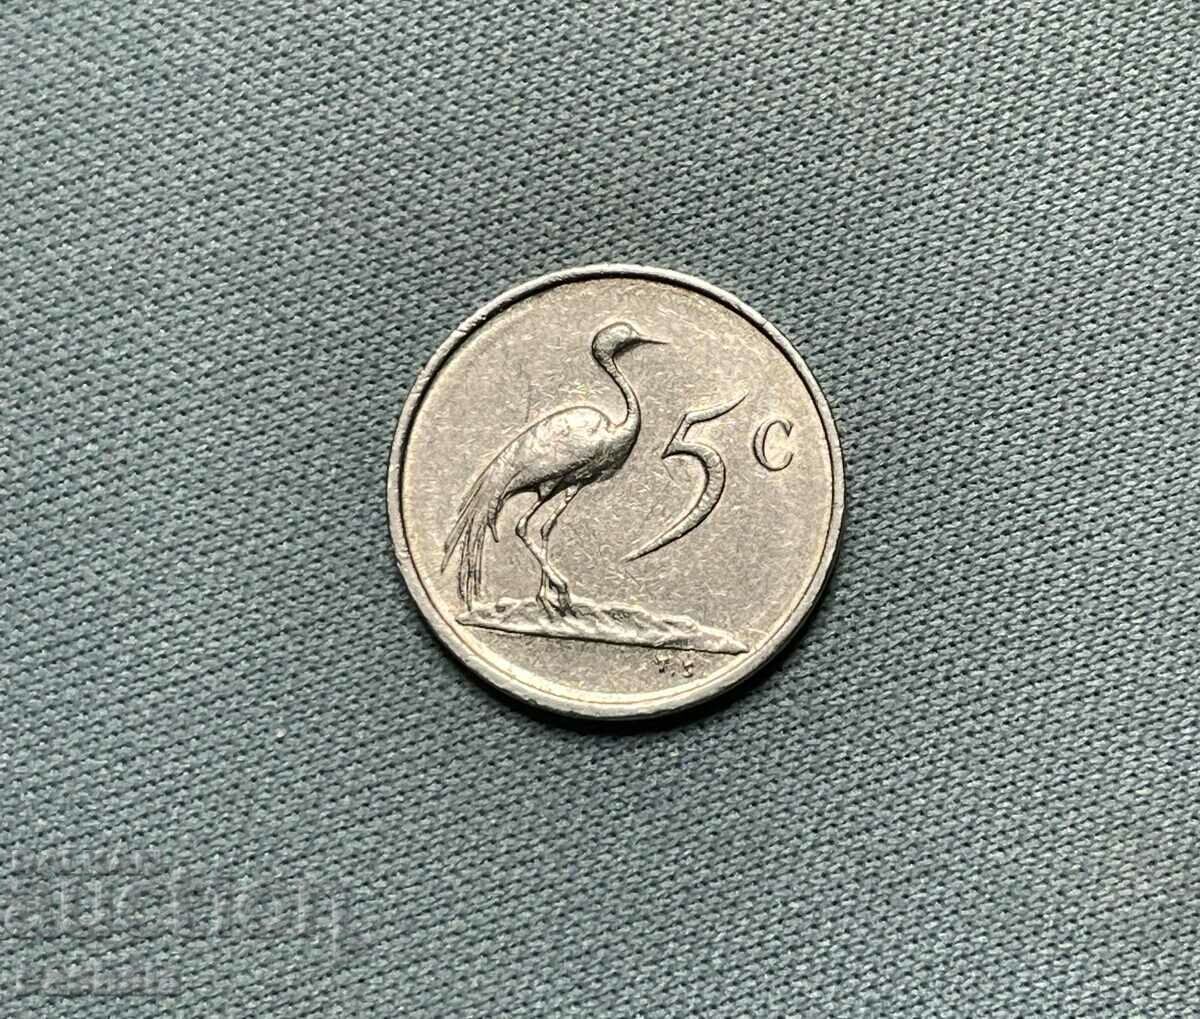 South Africa 5 cent 1979